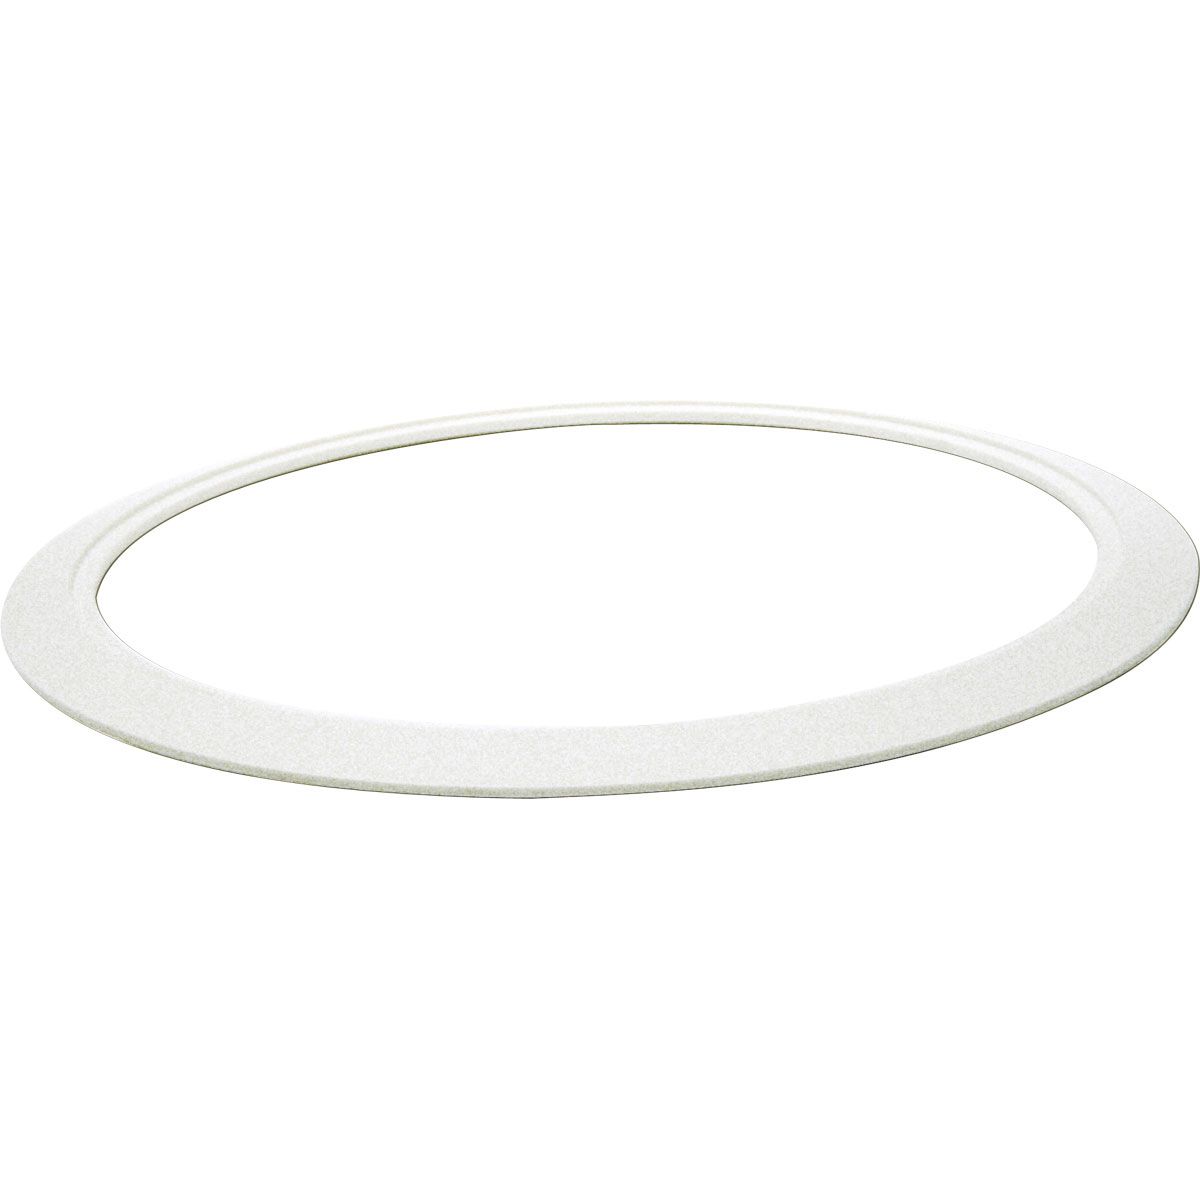 P8585-01 GOOF RING FOR 6in HSNG